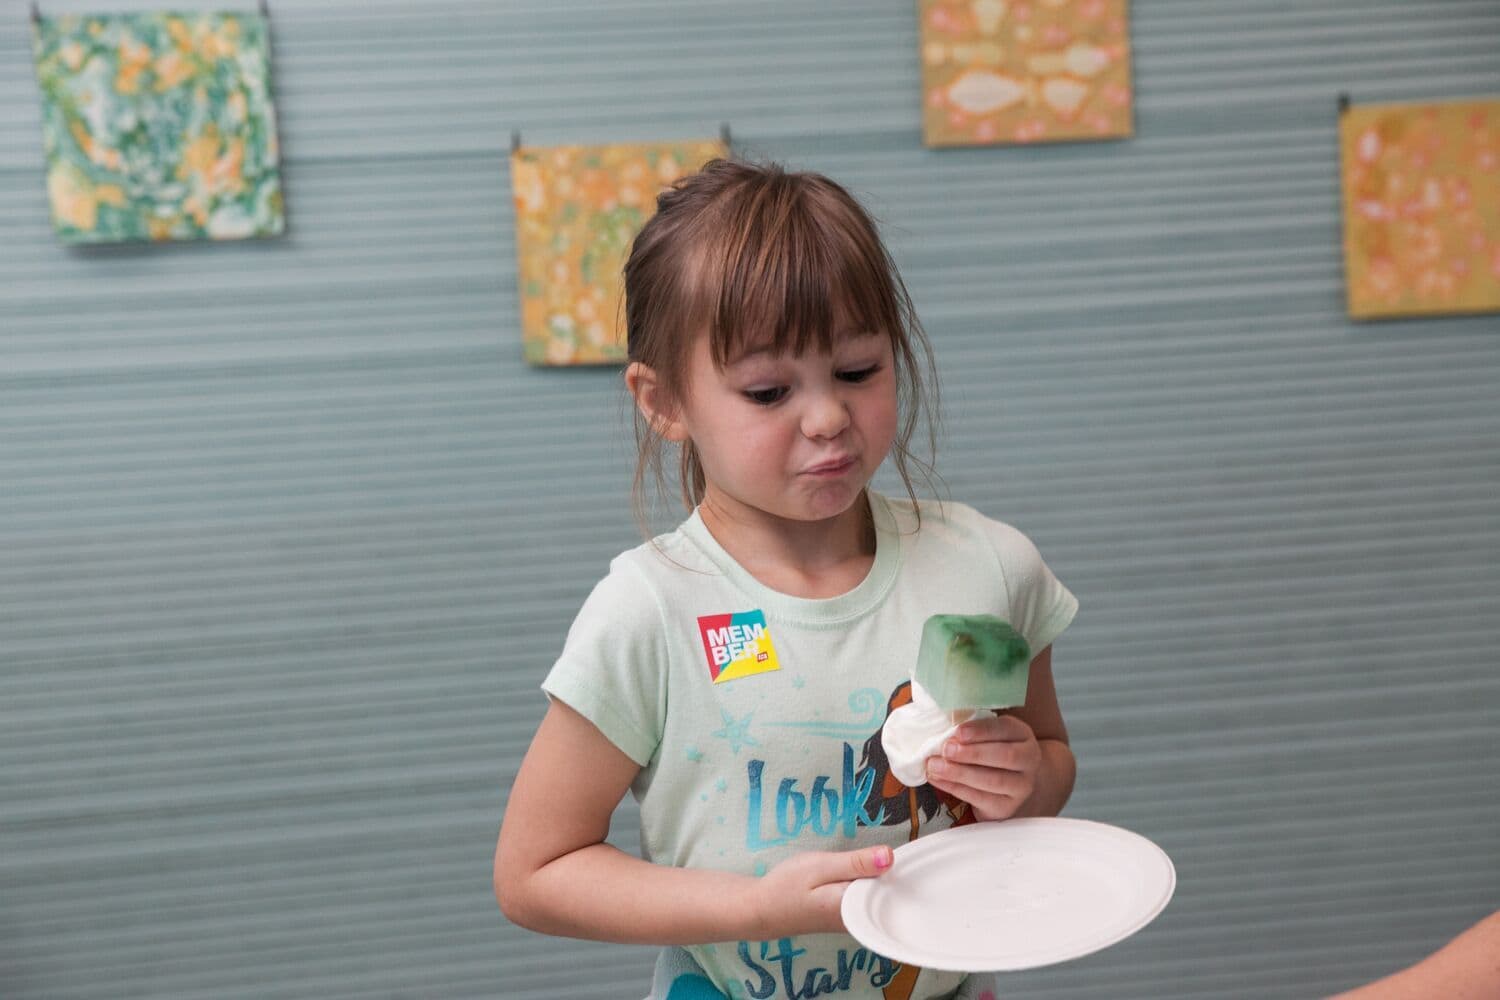 Museum visitor tastes artist Evelyn Rydz's phytoplankton popsicle at the ICA. (Courtesy Galya Feierman/ICA)